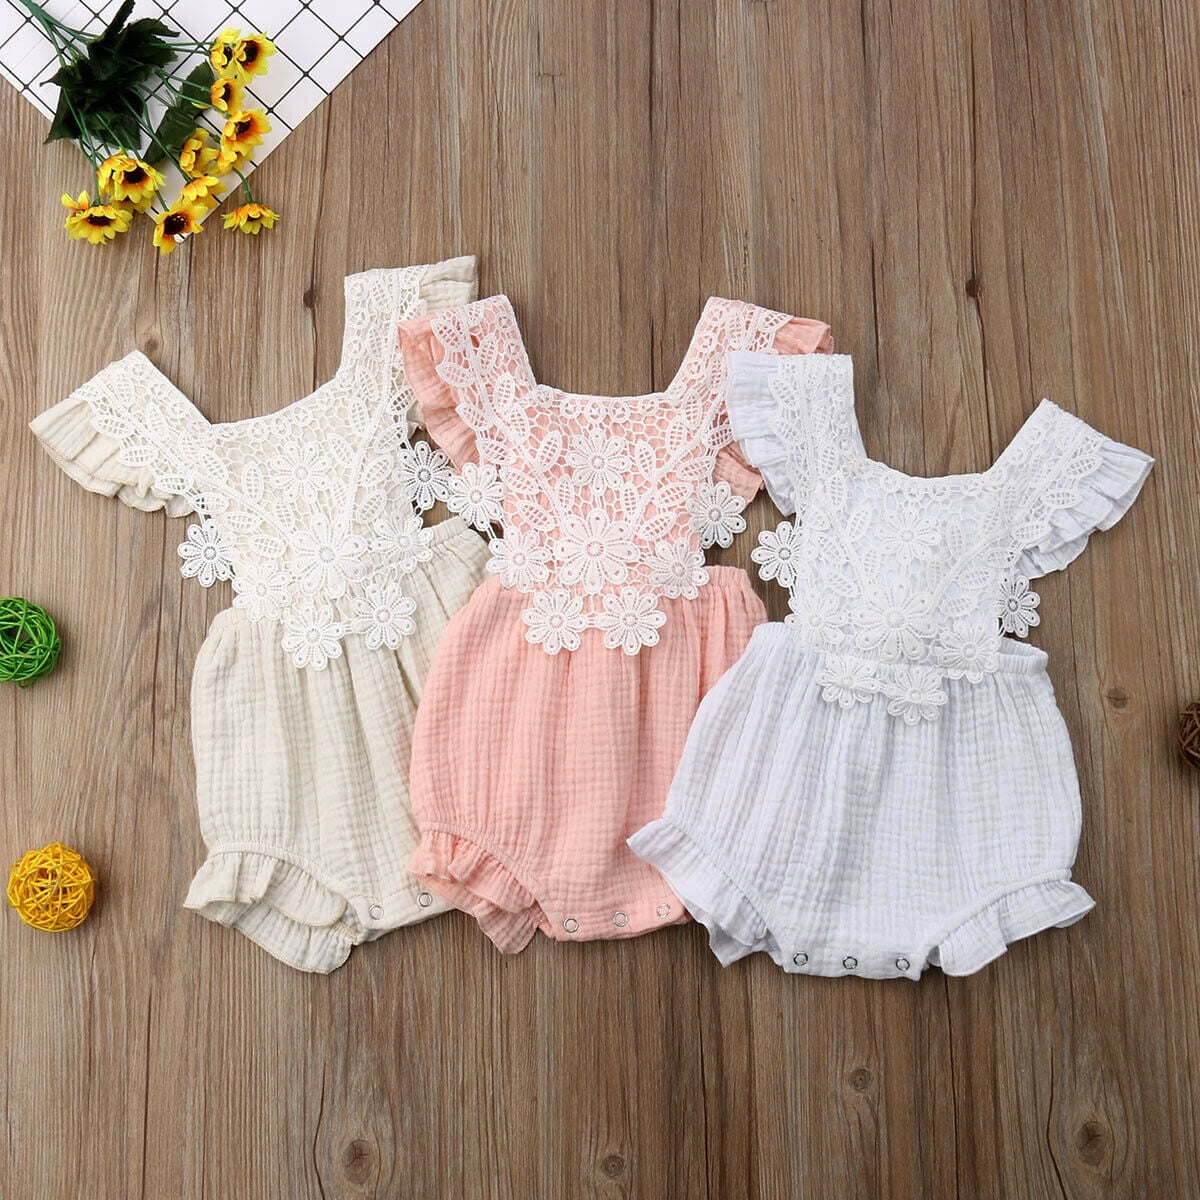 Infant Baby Girl Bodysuit Cotton Lace Sleeveless Romper Jumpsuit Clothes Outfits